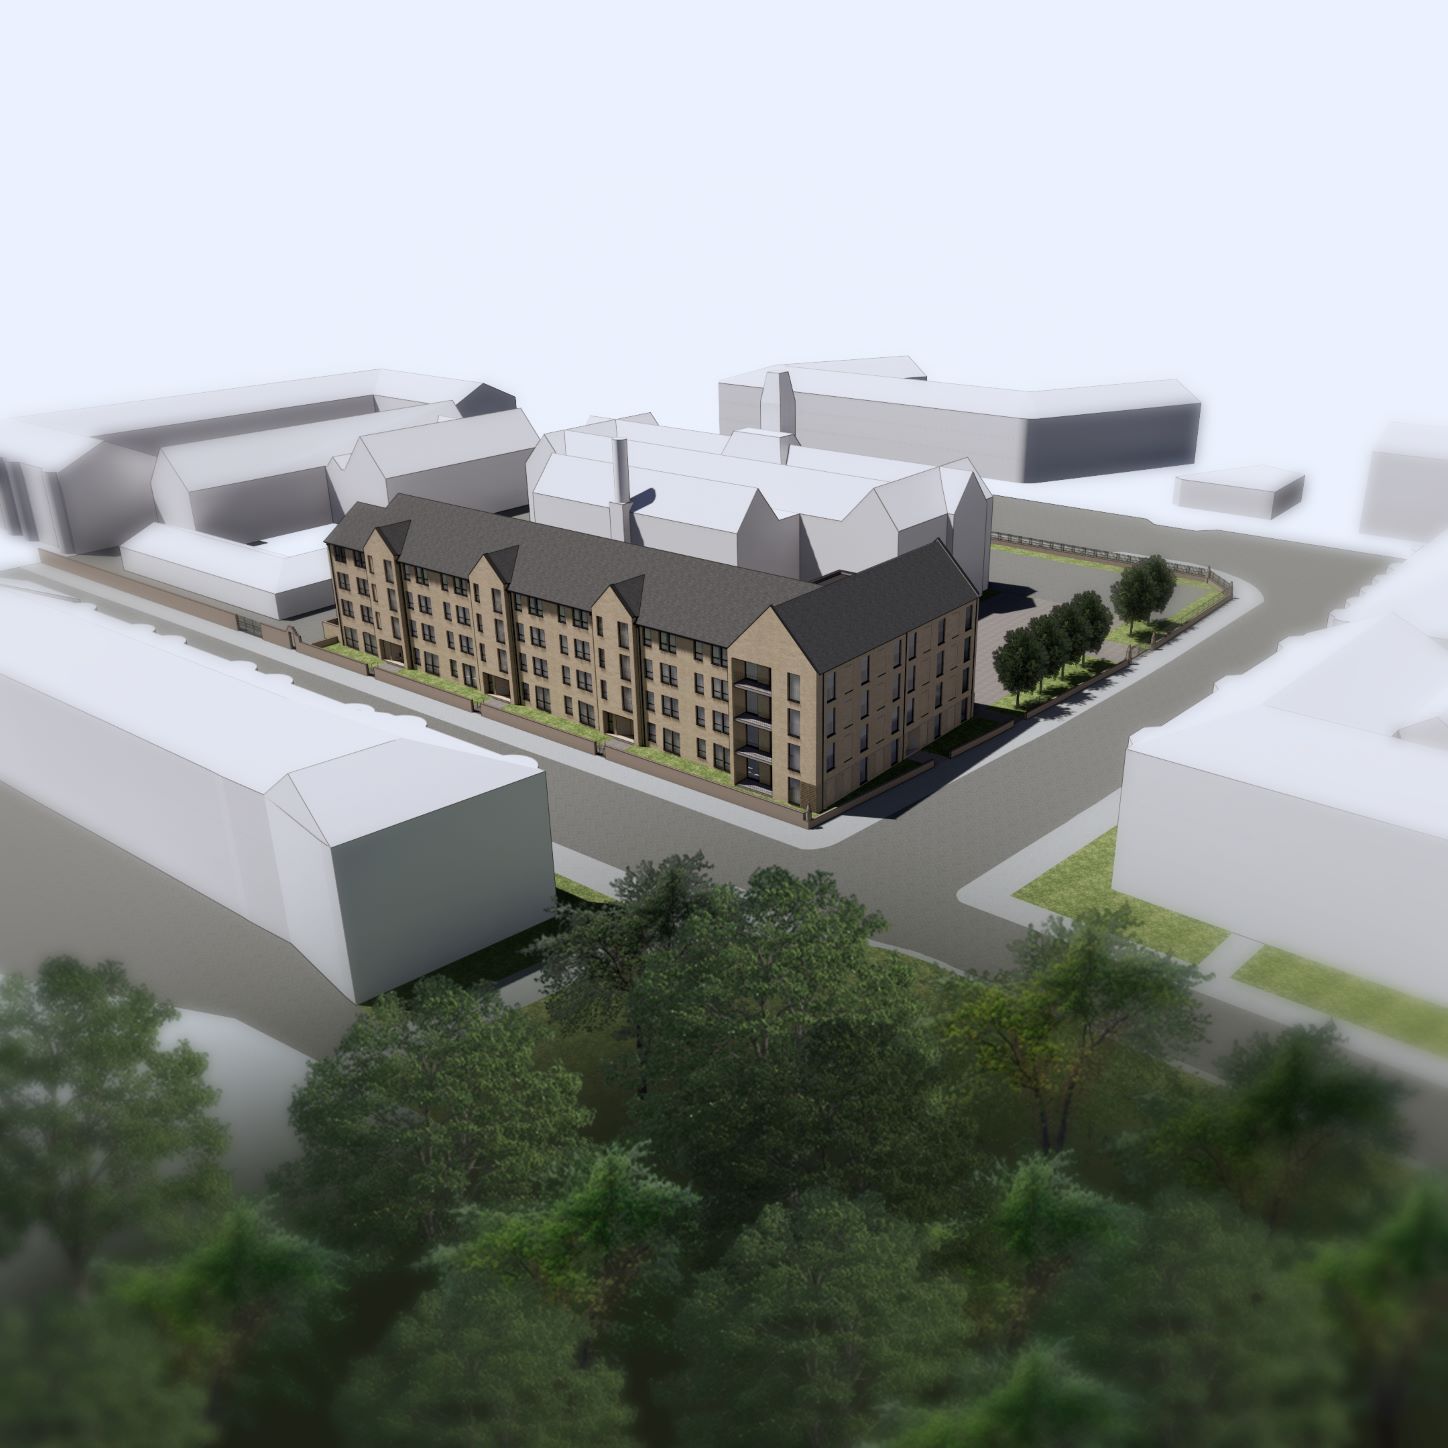 Sale of former Bellahouston Academy annexe paves way for new affordable flats